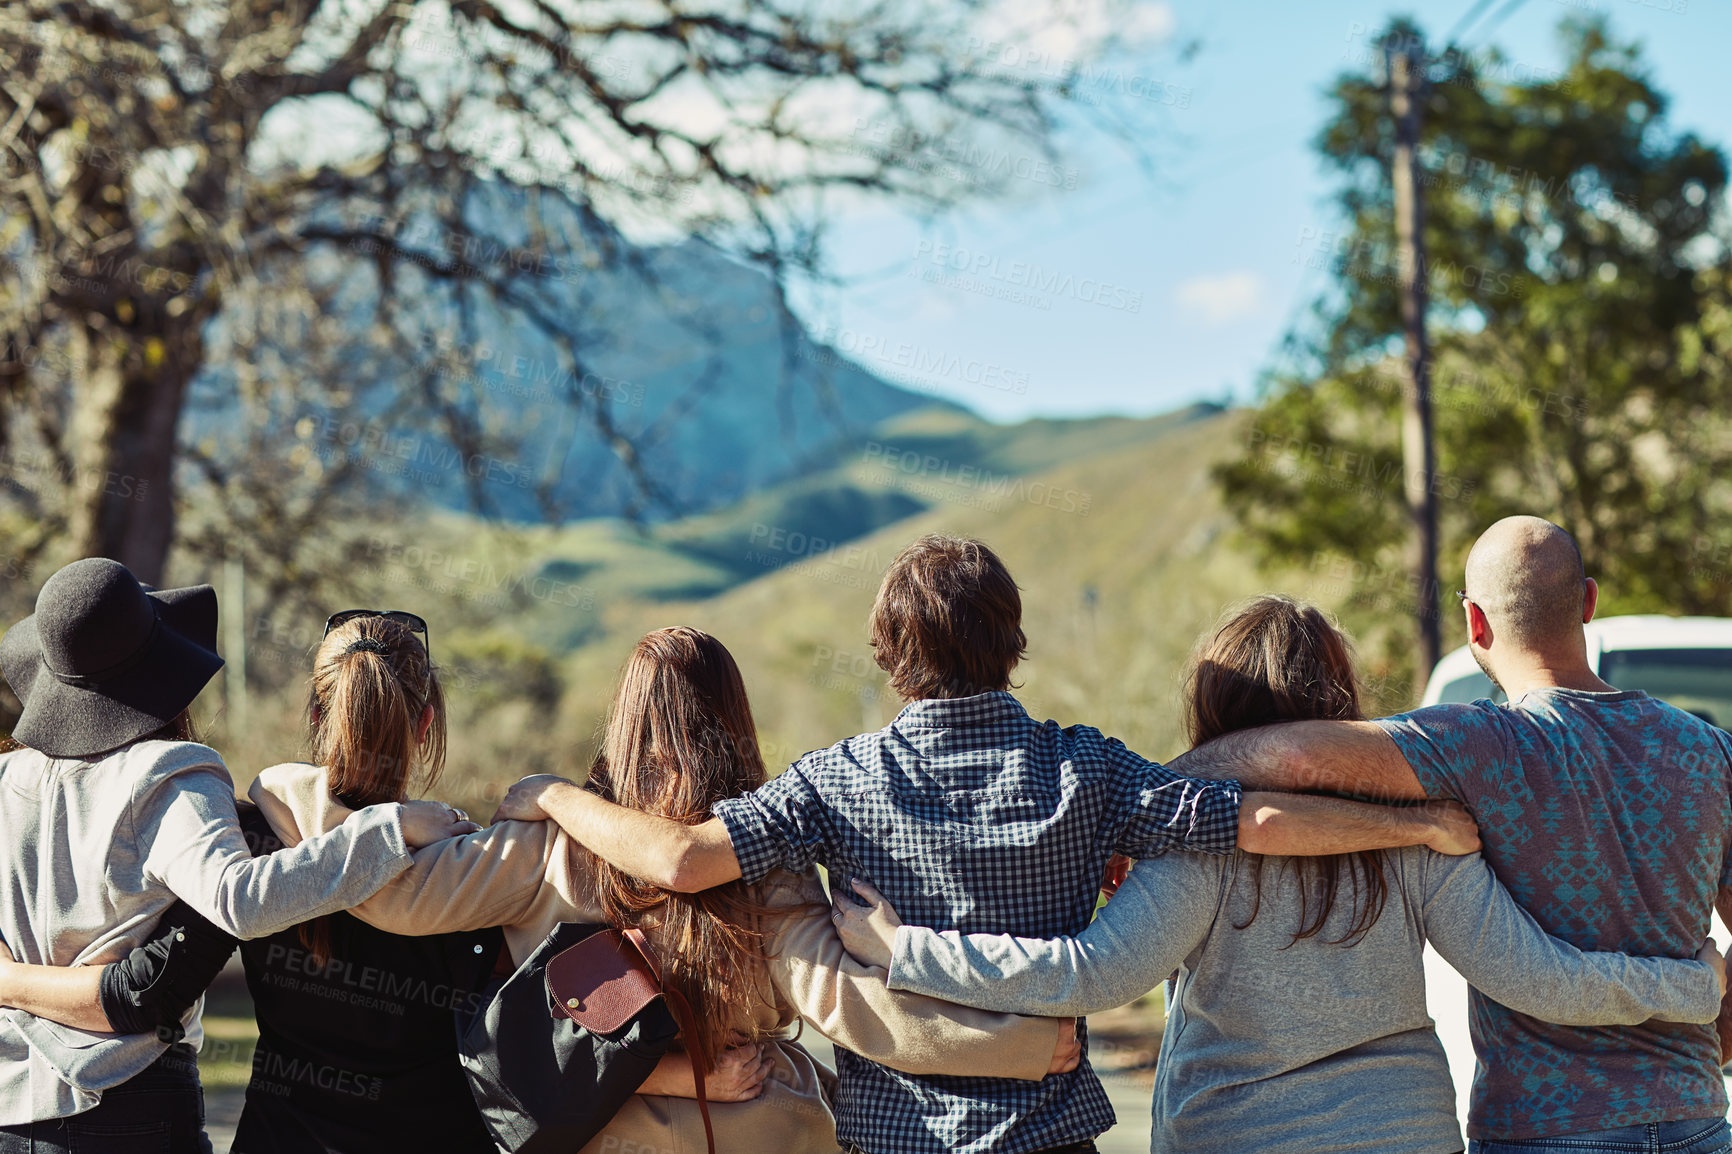 Buy stock photo Rearview shot of a group of friends standing together